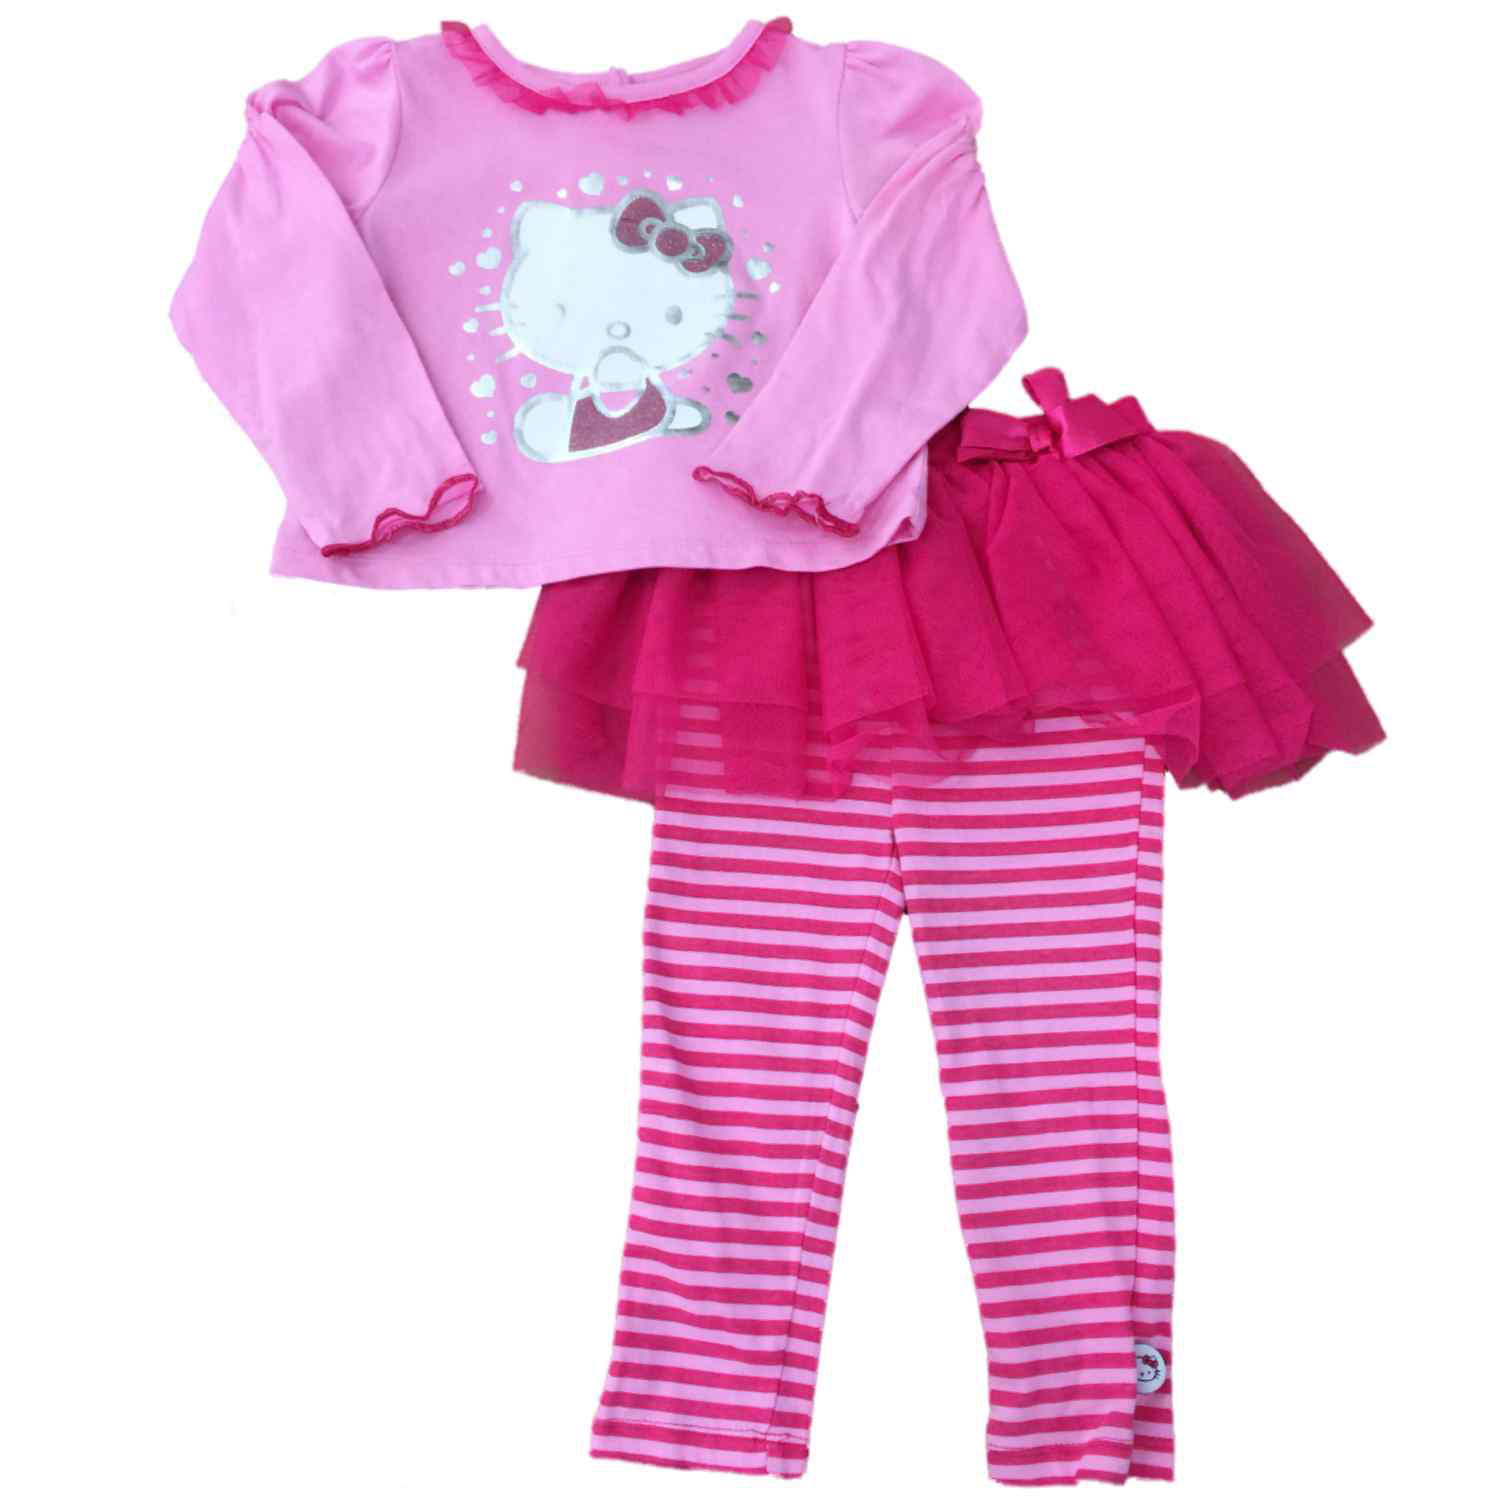 Baby Girl Hello Kitty Clothing 2 Piece Sets  Newborn to 24M 